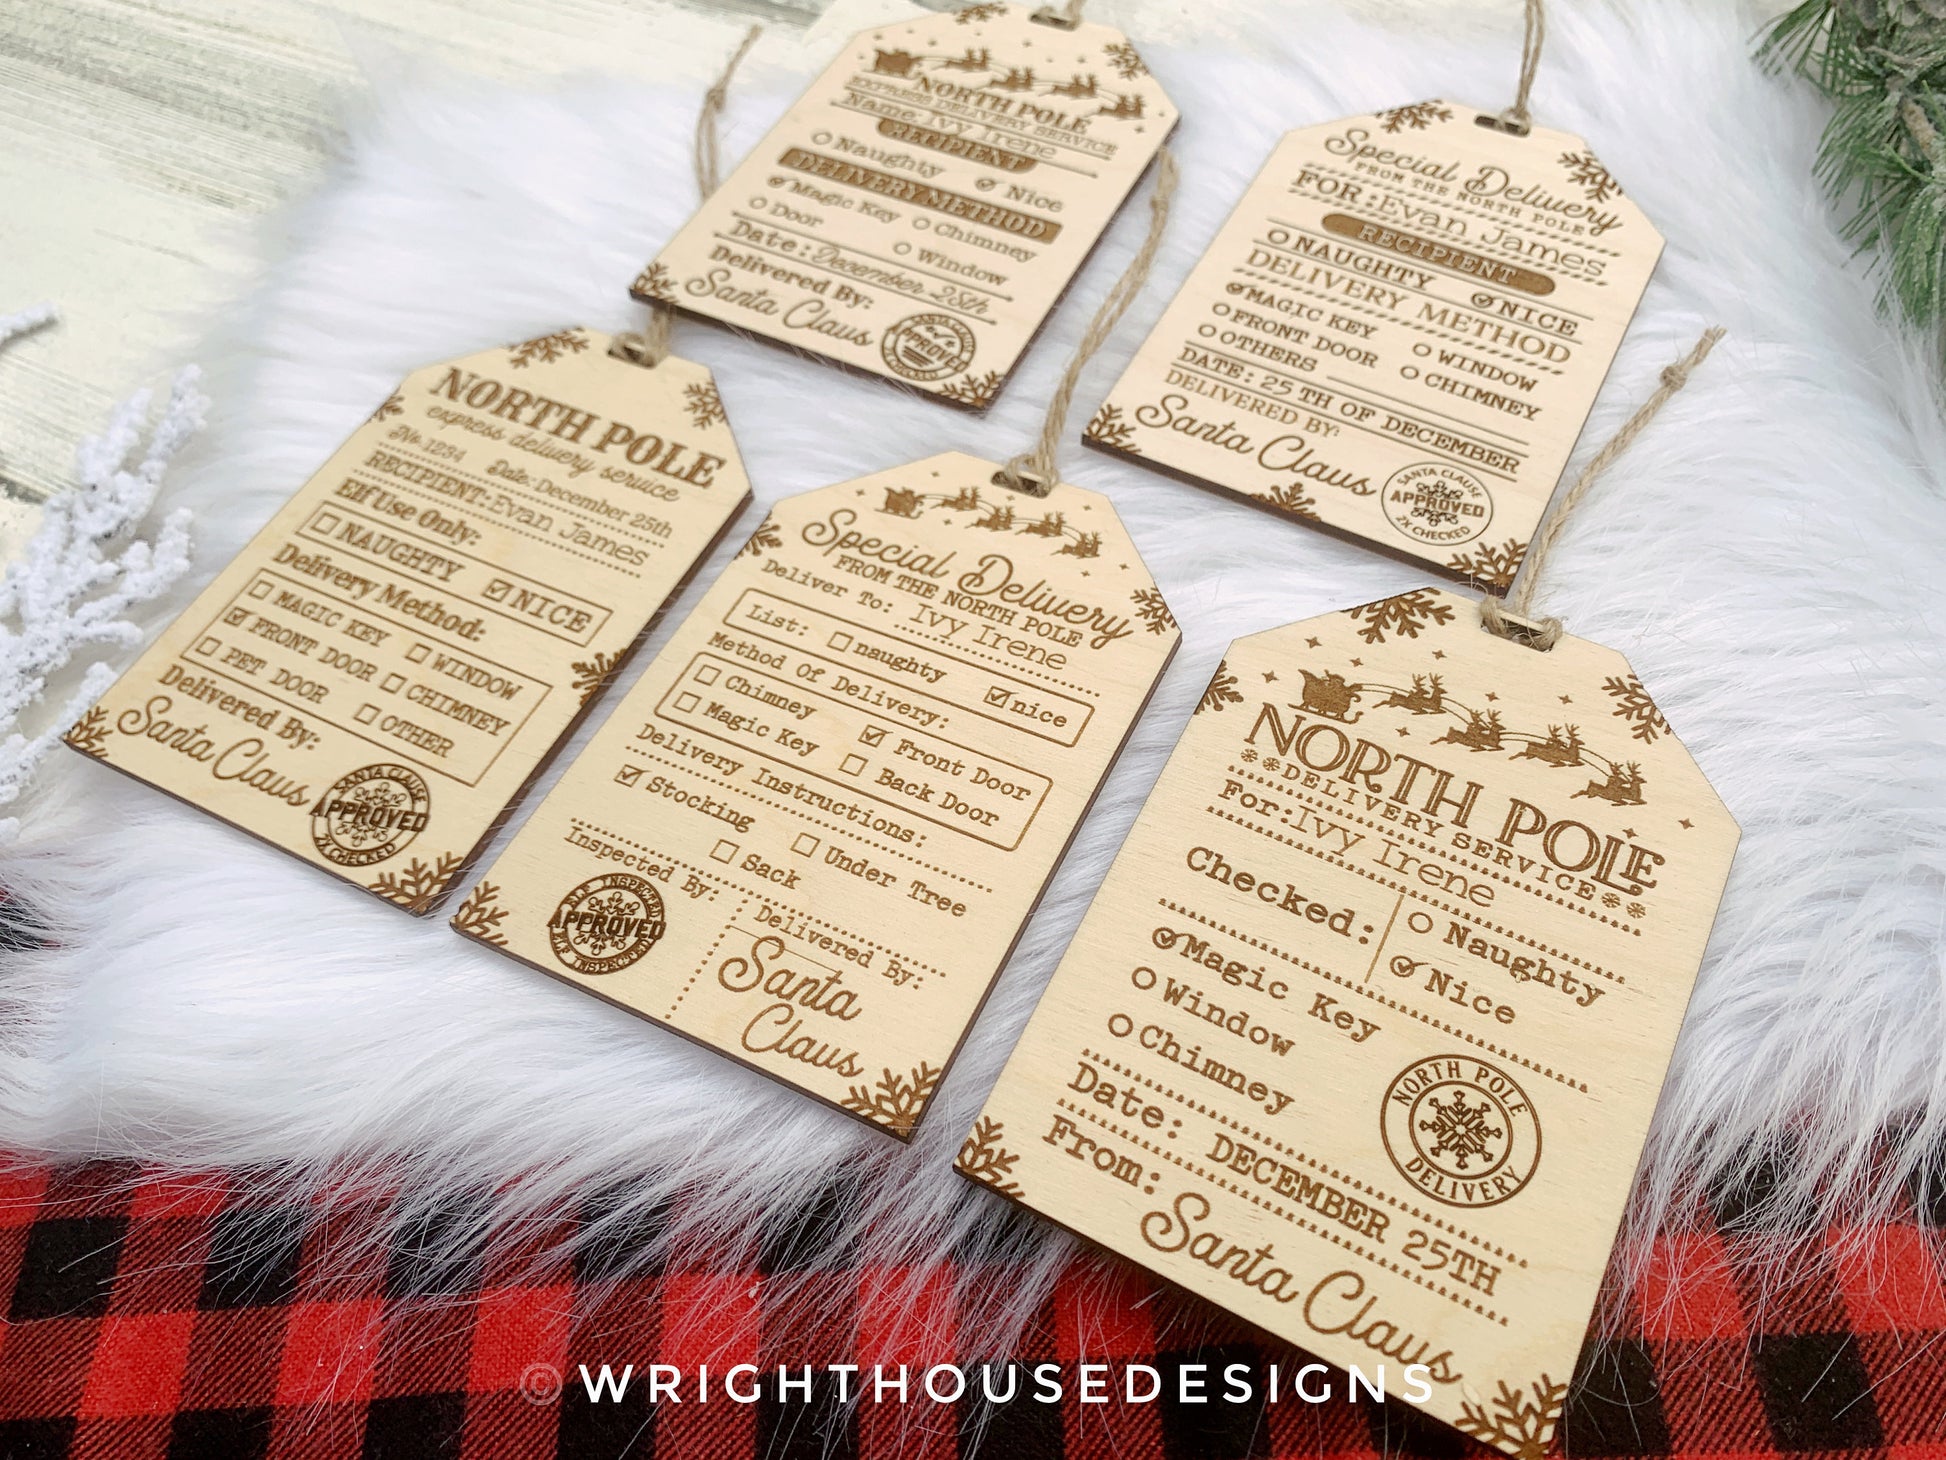 Santa's North Pole Express Delivery Gift Bag Tags - Wooden Engraved Christmas Labels - Personalized Name Tag - Holiday Ornament for Kids